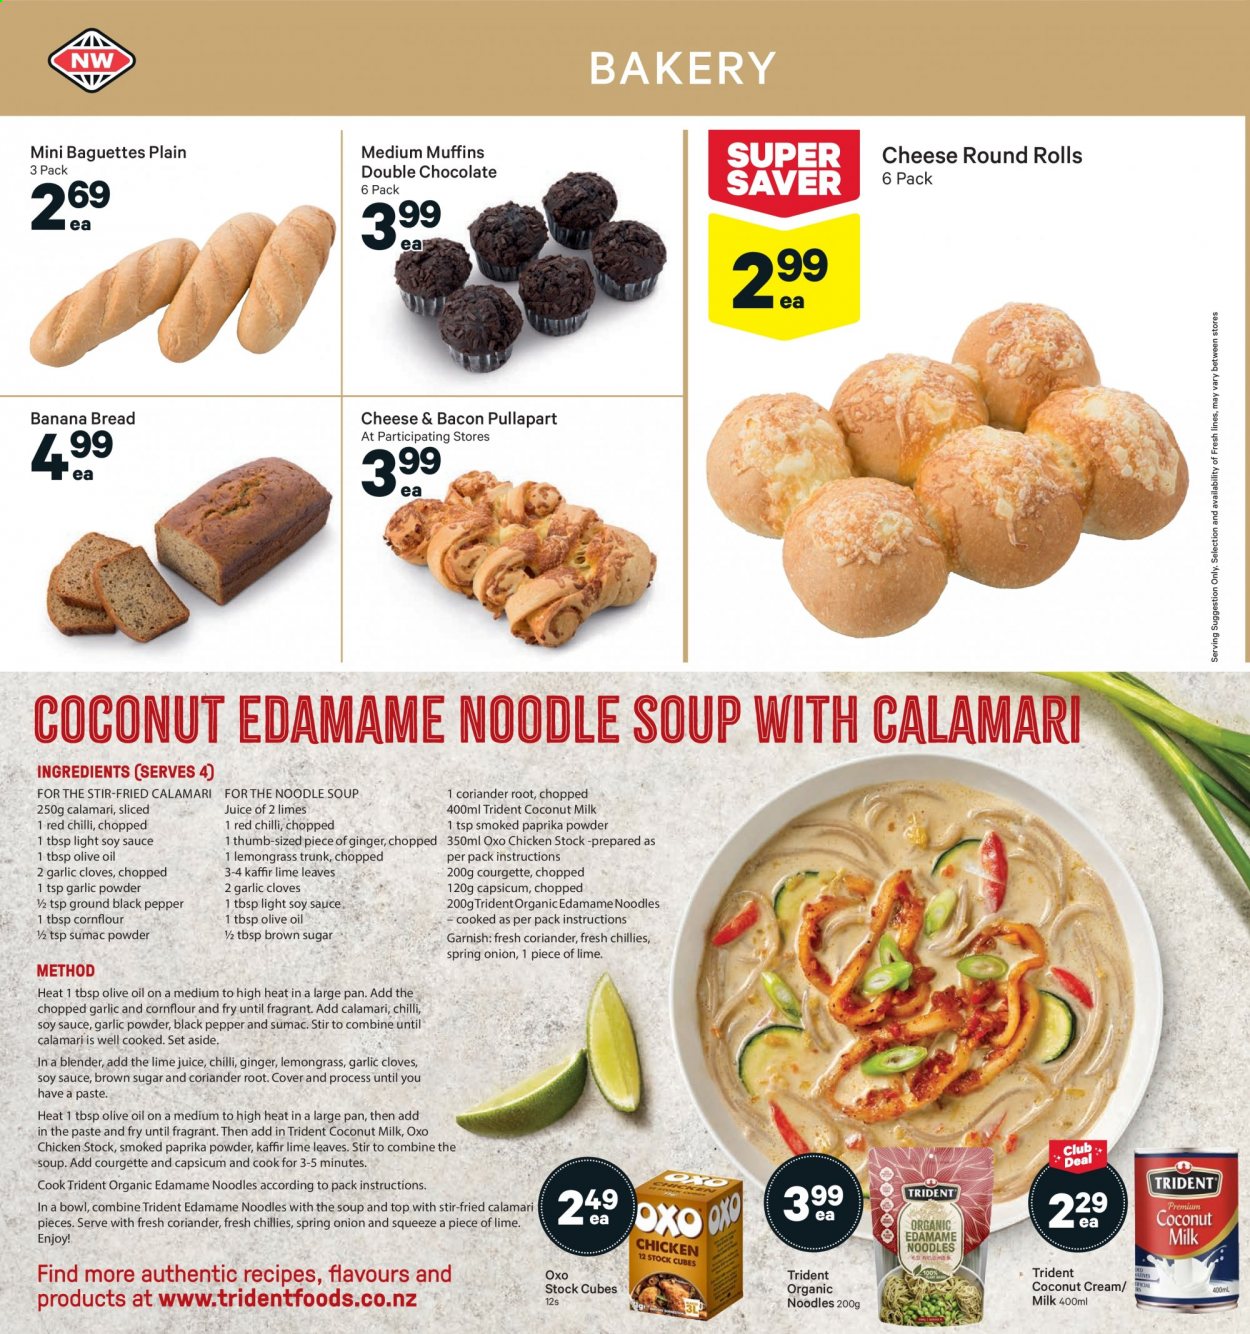 thumbnail - New World mailer - 09.08.2021 - 15.08.2021 - Sales products - baguette, bread, muffin, banana bread, Edamame, green onion, calamari, soup, noodles cup, noodles, bacon, chocolate, Trident, coconut milk, cloves, garlic powder, coriander, soy sauce, oil. Page 10.